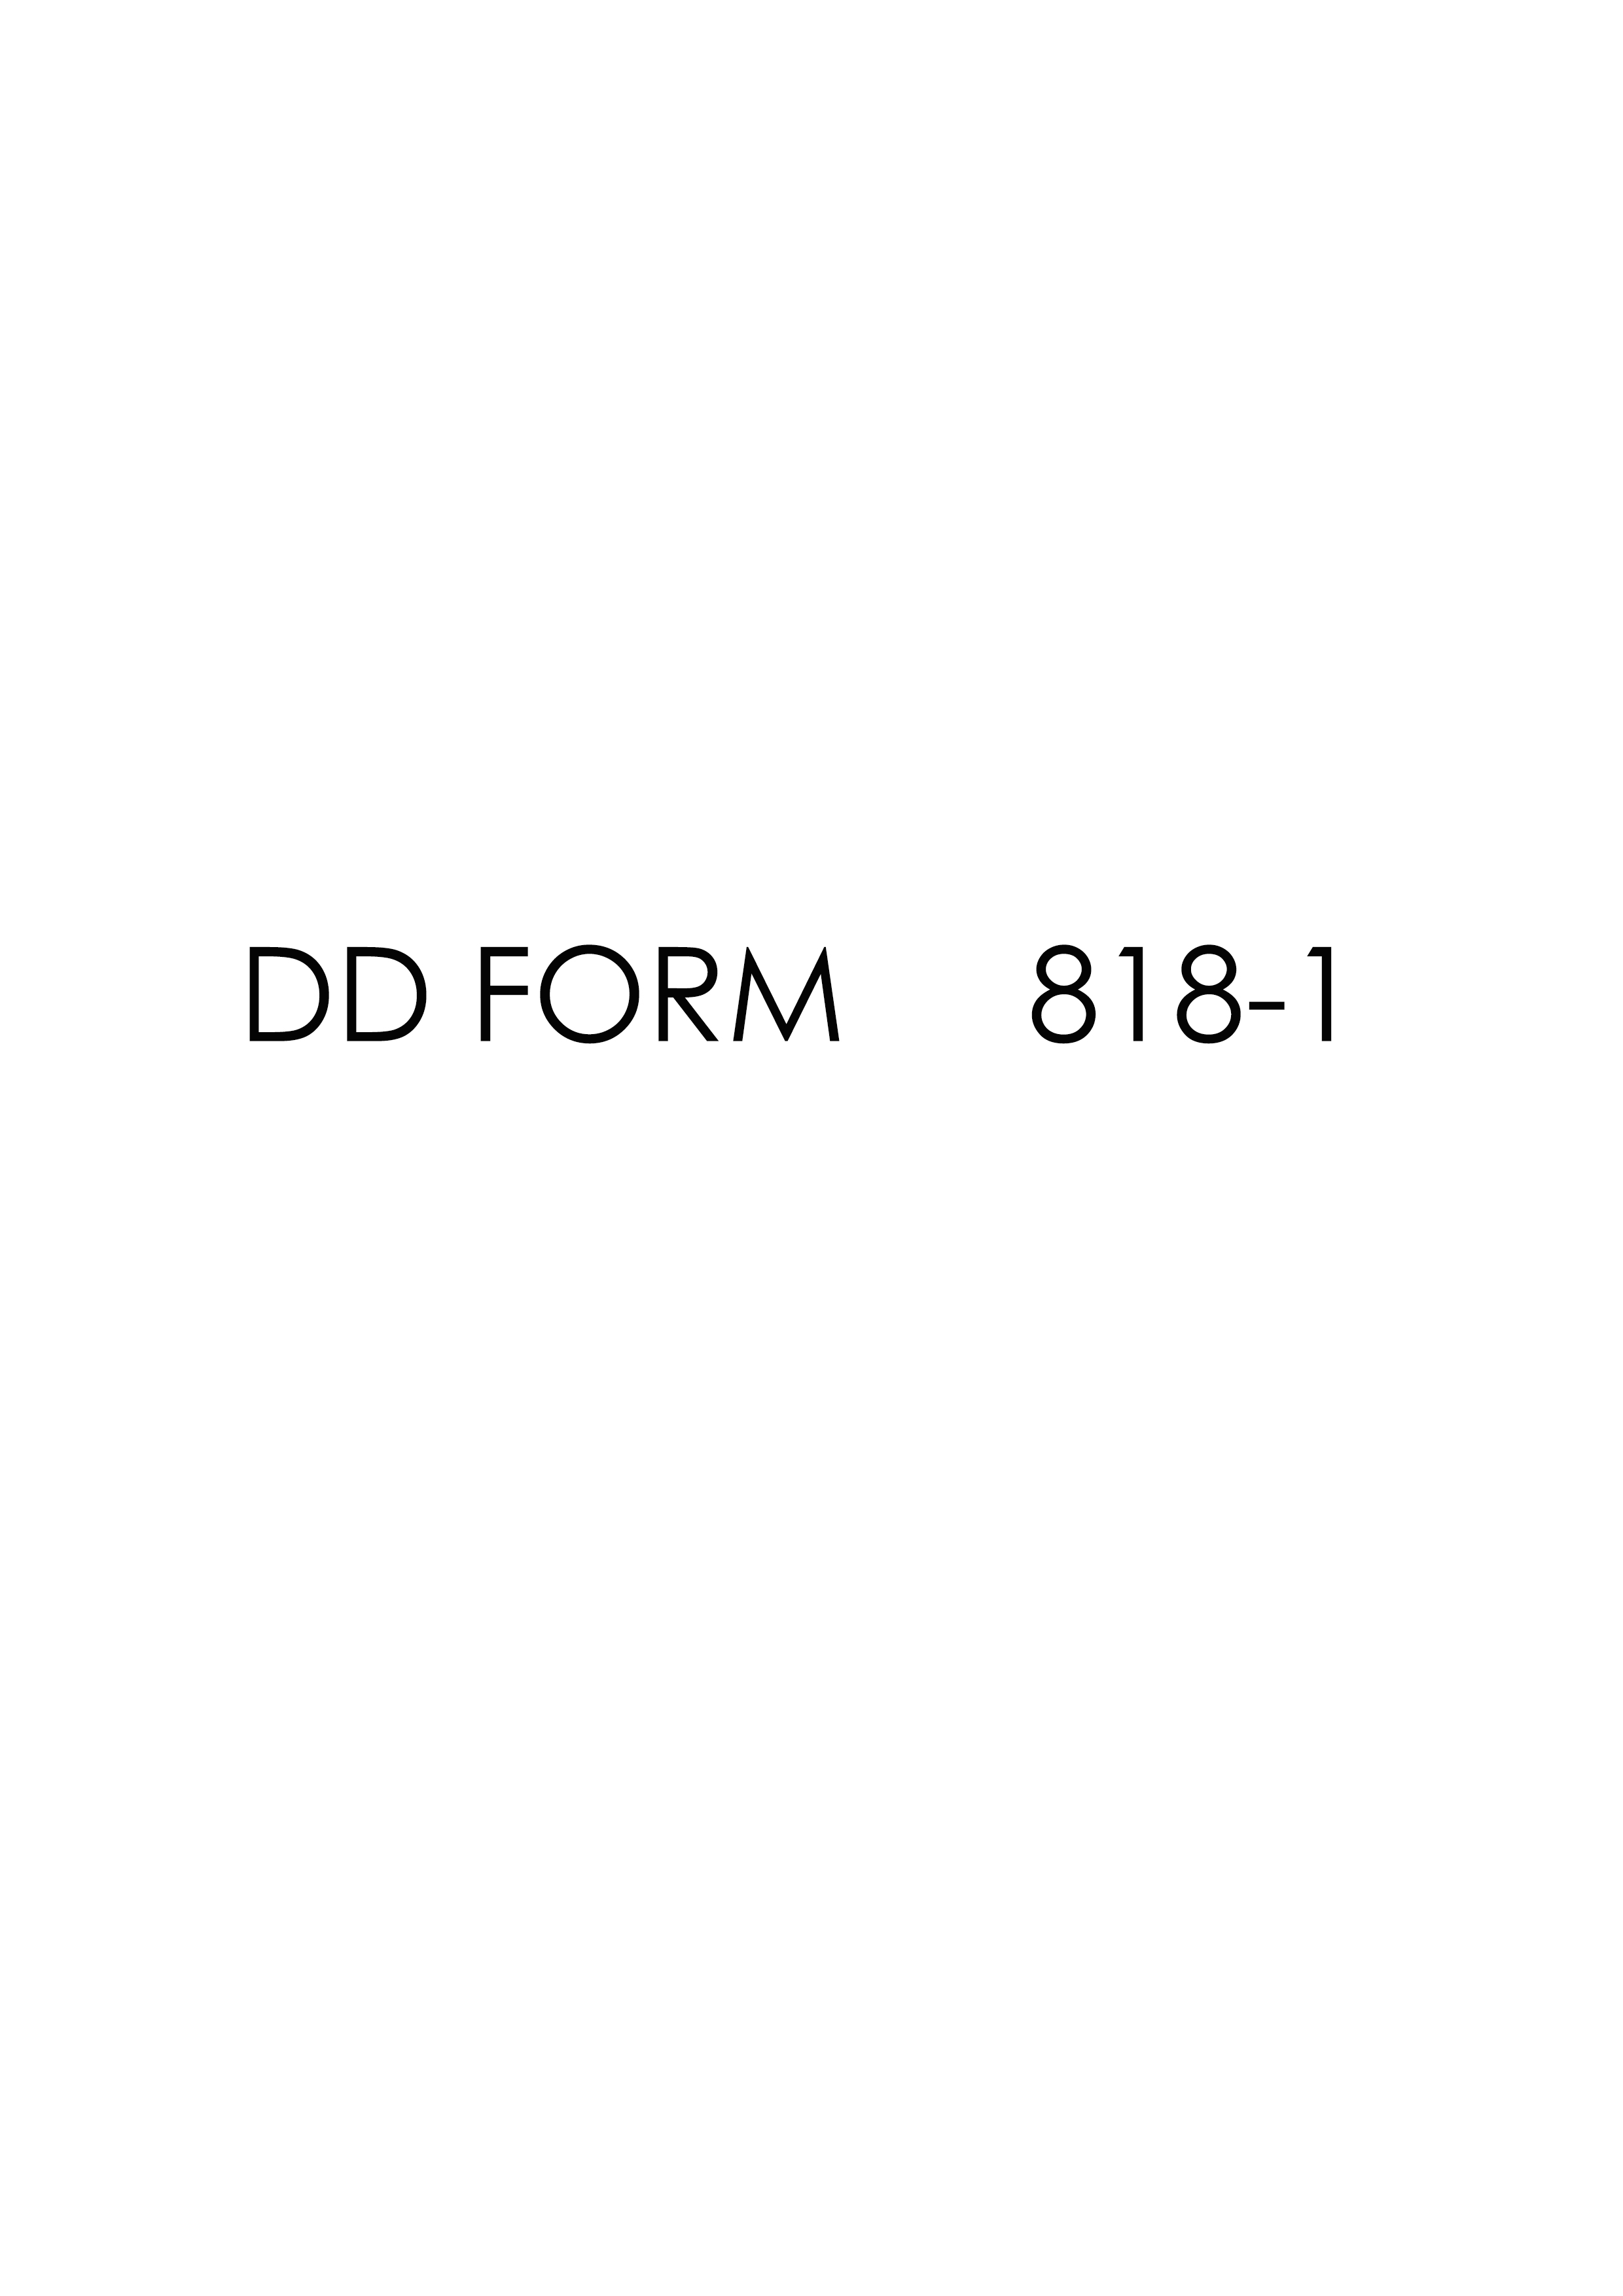 dd Form 818-1 fillable